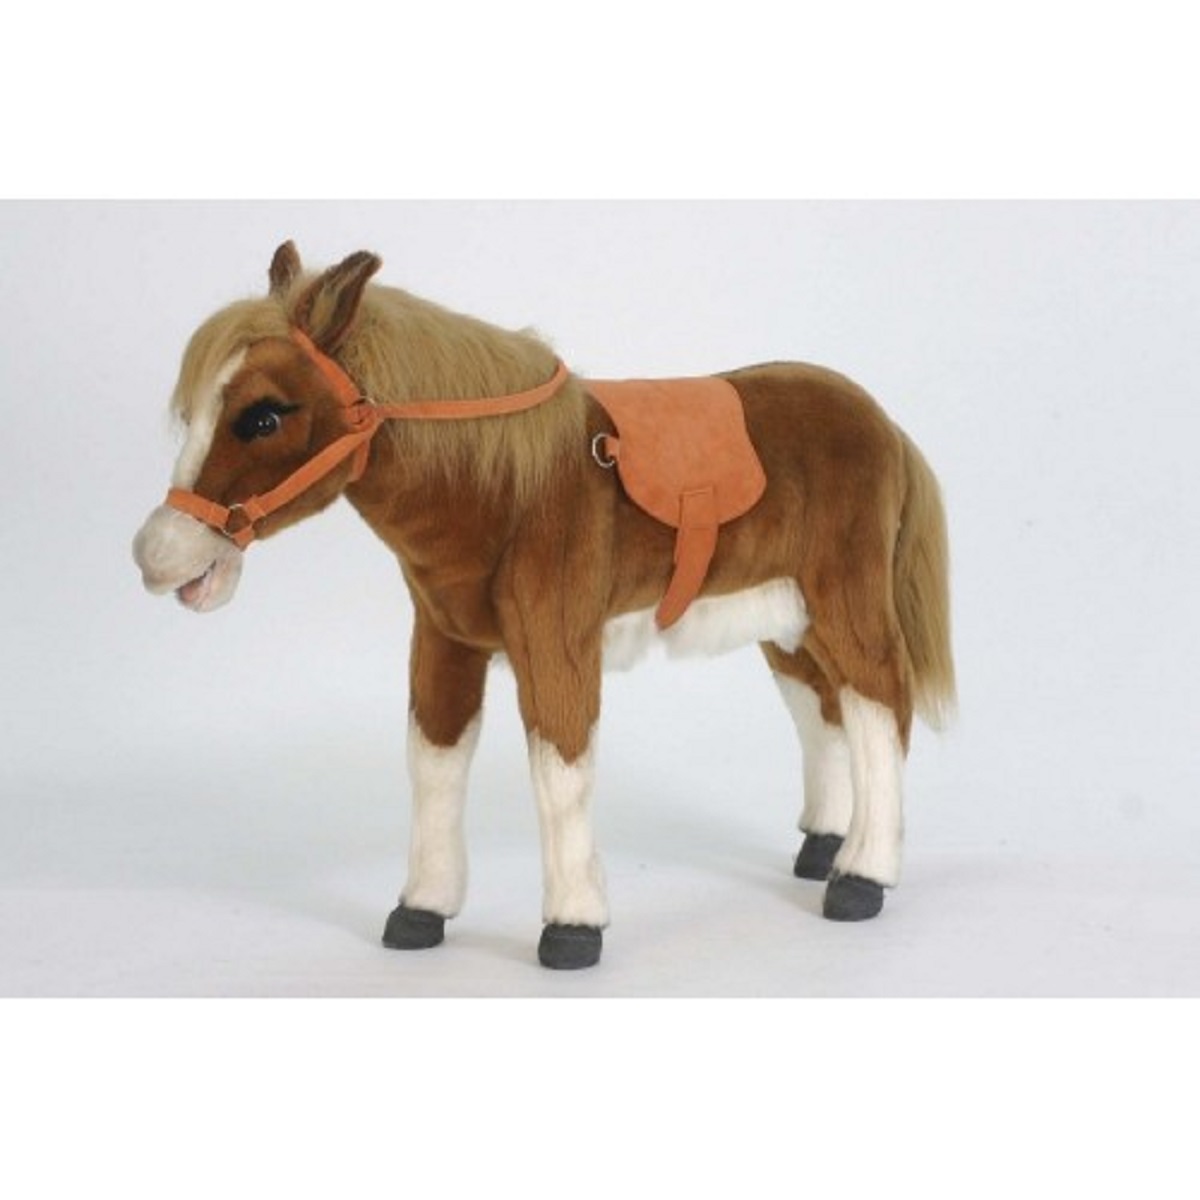 Handcrafted Cuddlers Life-like Handcrafted Extra Soft Plush Pony Stuffed Animal 27.5"